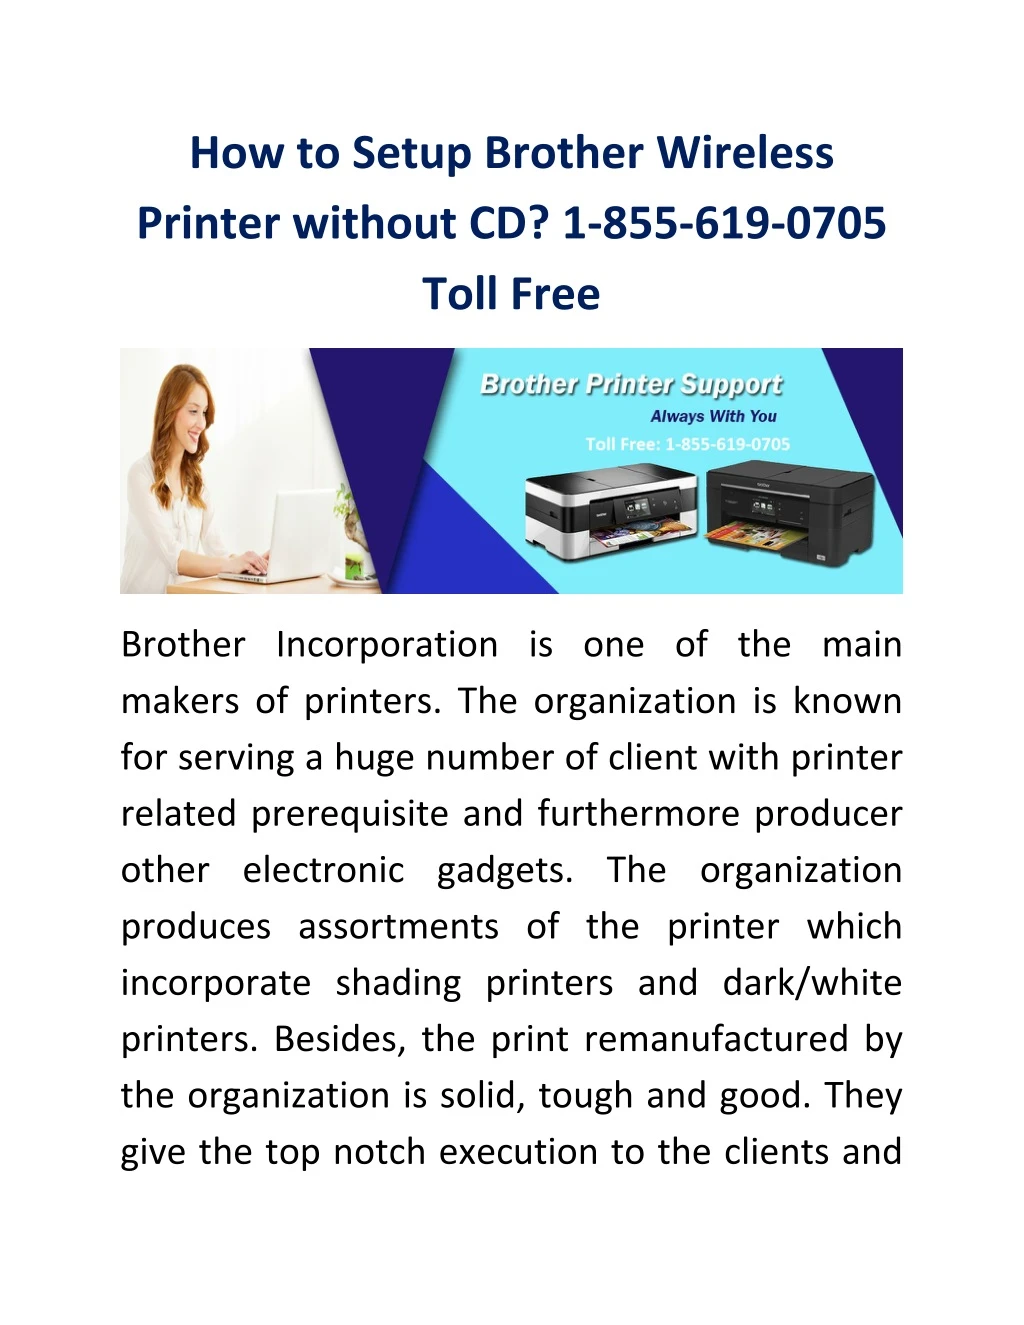 how to setup brother wireless printer without